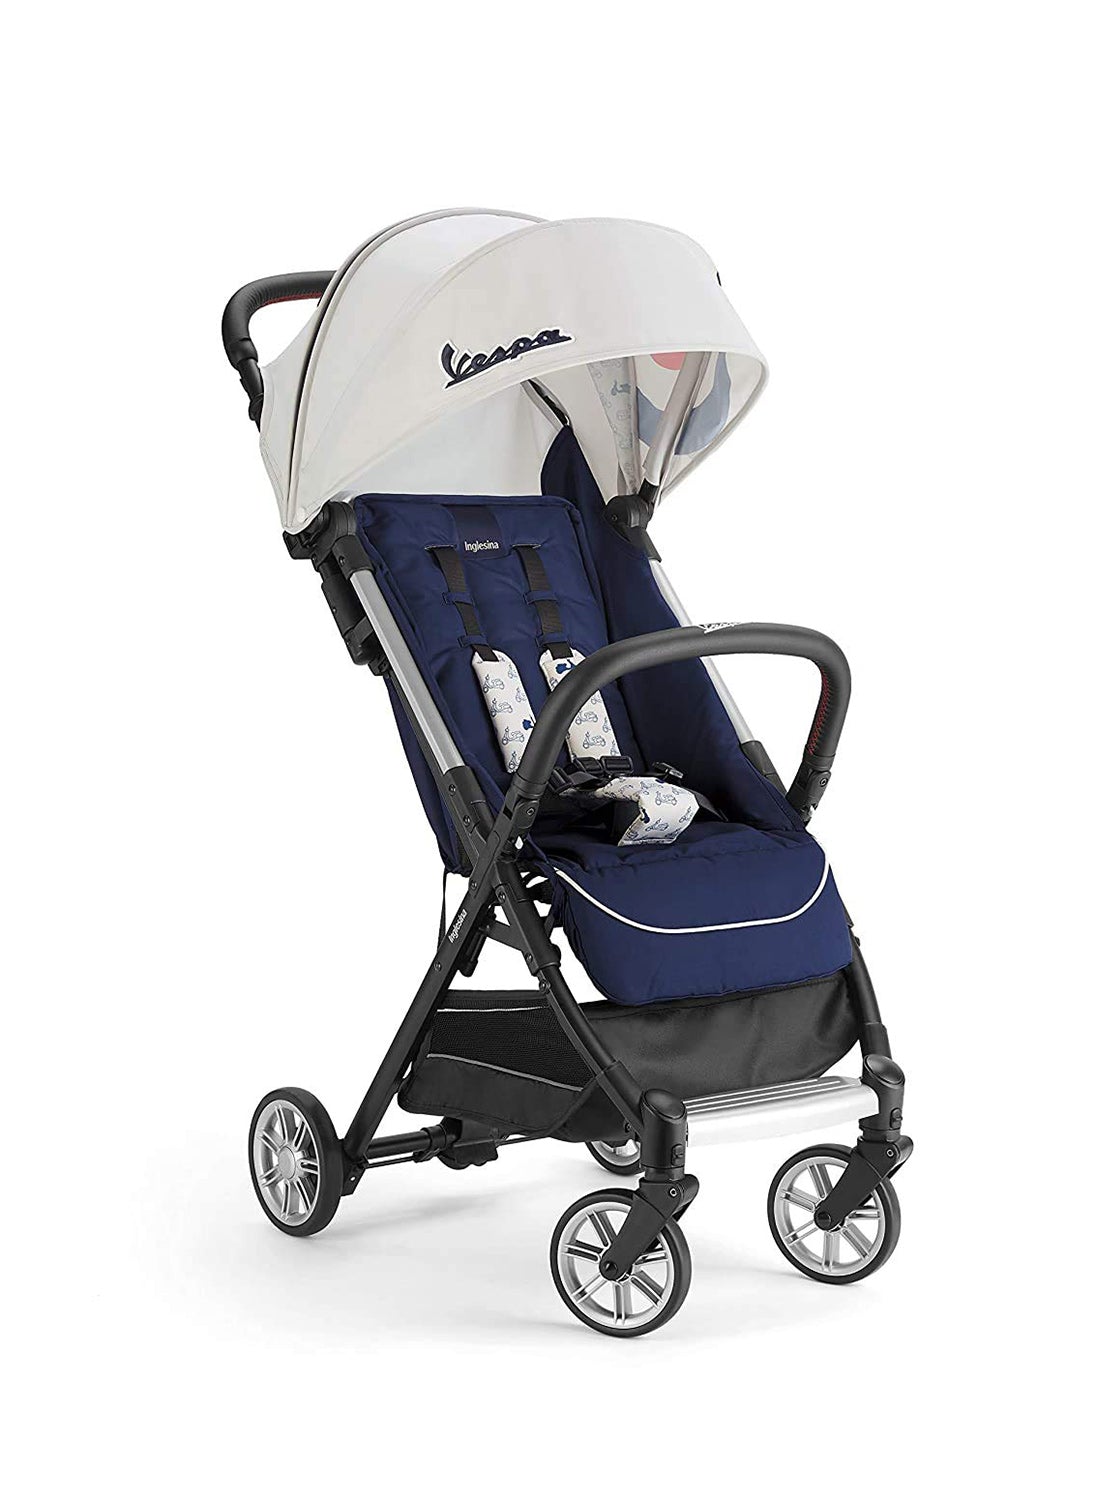  Inglesina Quid Baby Stroller - Lightweight at 13 lbs,  Travel-Friendly, Ultra-Compact & Folding - Fits in Airplane Cabin &  Overhead - for Toddlers from 3 Months to 50 lbs 